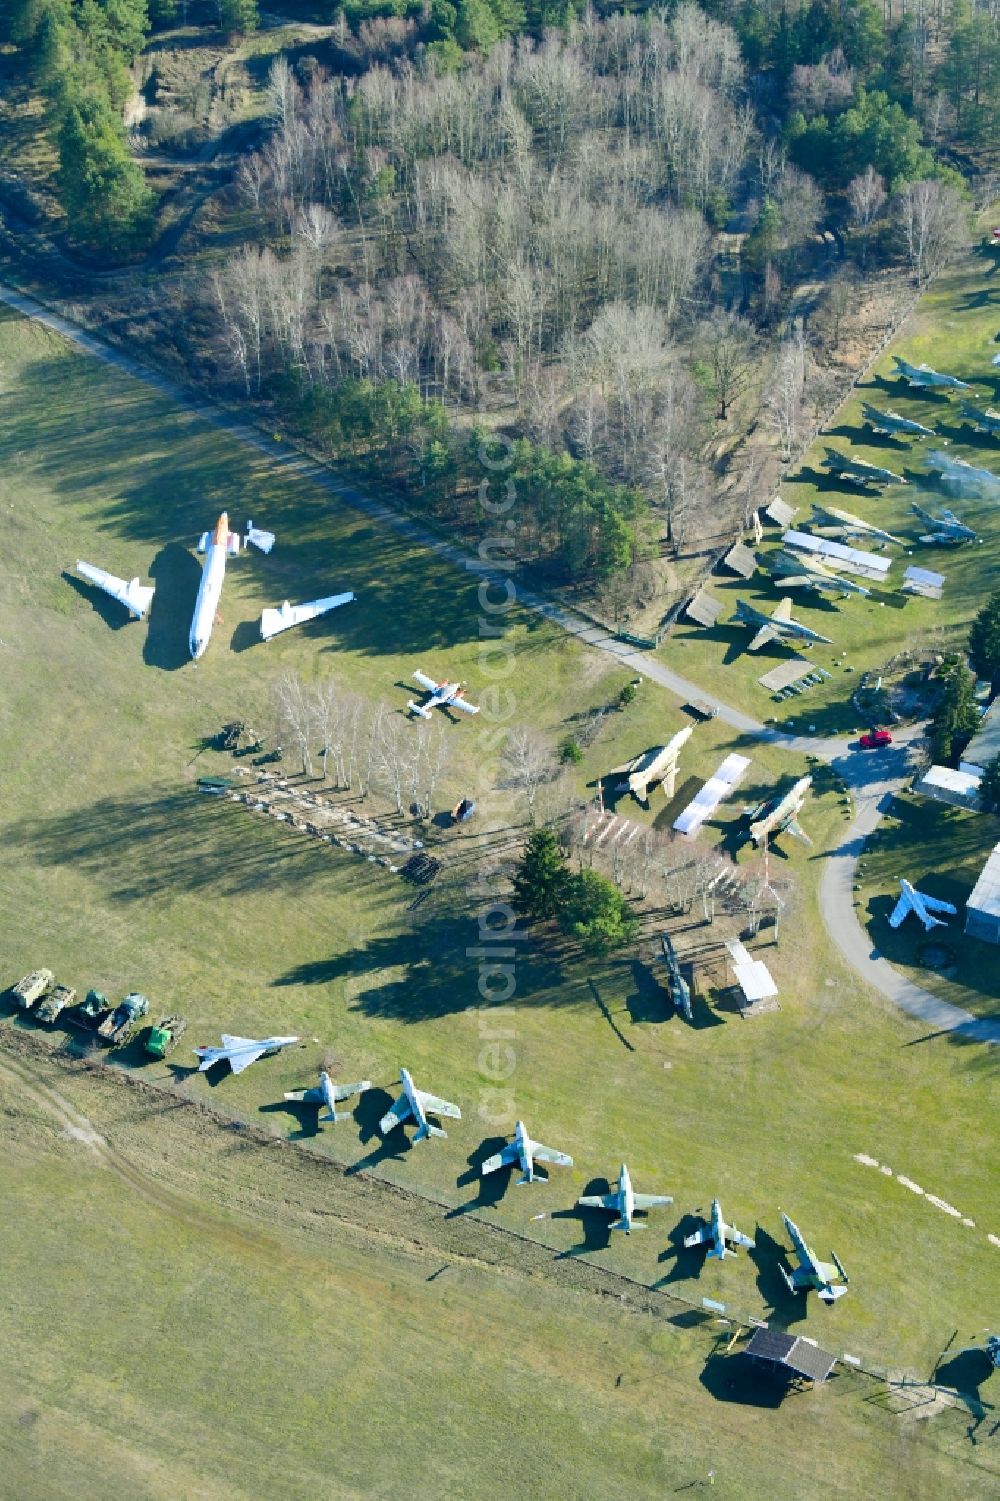 Cottbus from above - View of the Airfield Museum on the site of the former airfield Cottbus. Covering an area with military aircrafts, agricultural aircraft and helicopters and also air traffic control and vehicle technology from the history of aviation are shown. All periods are presented in detail in the museum's images and documents